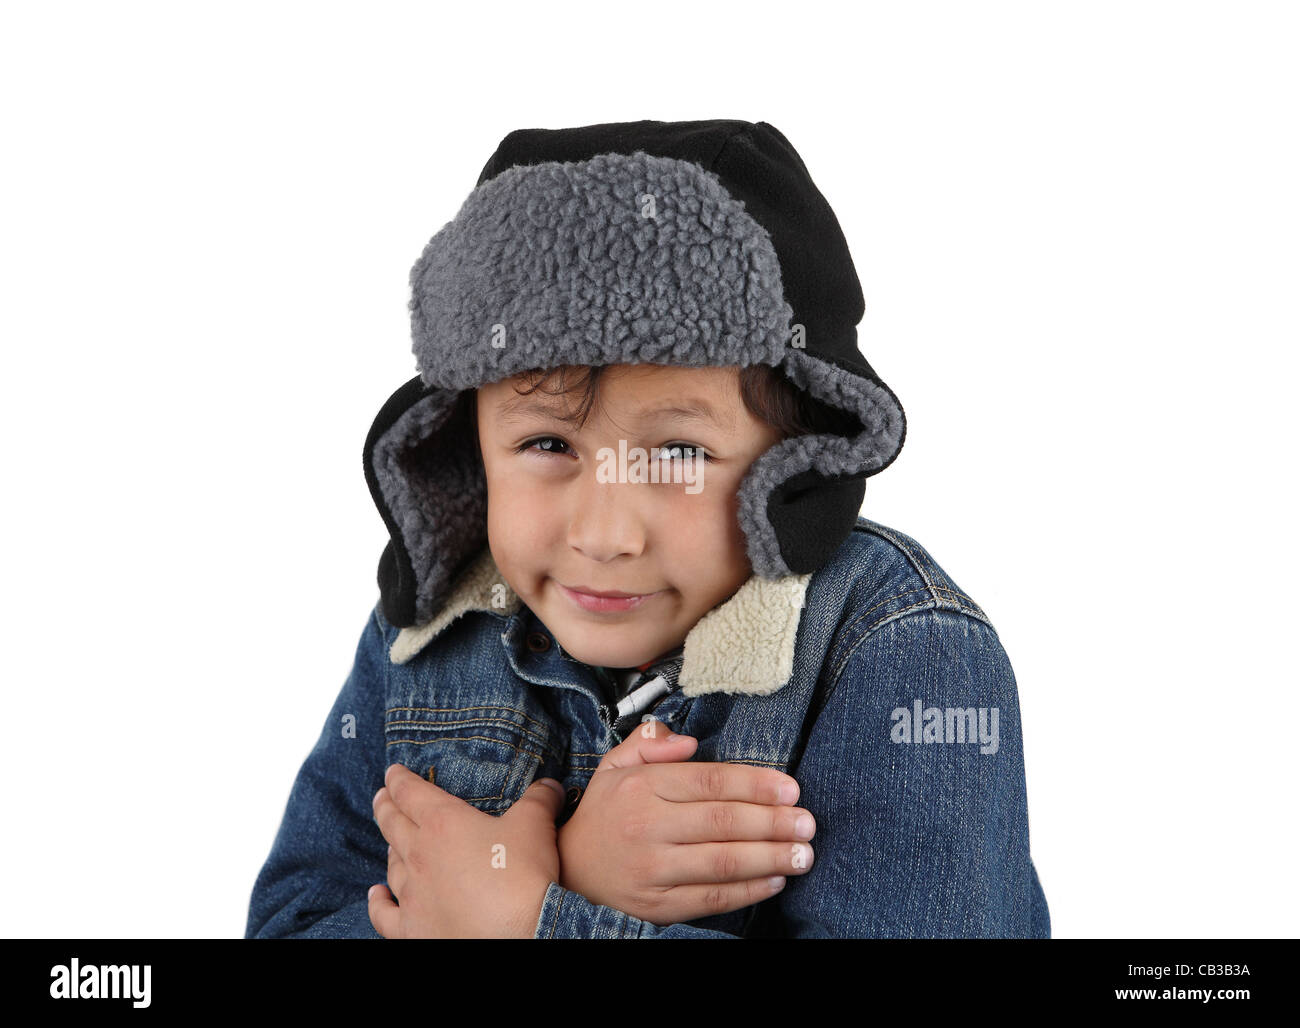 Boy freezing in the winter cold wearing woolen hat and jacket on white background Stock Photo